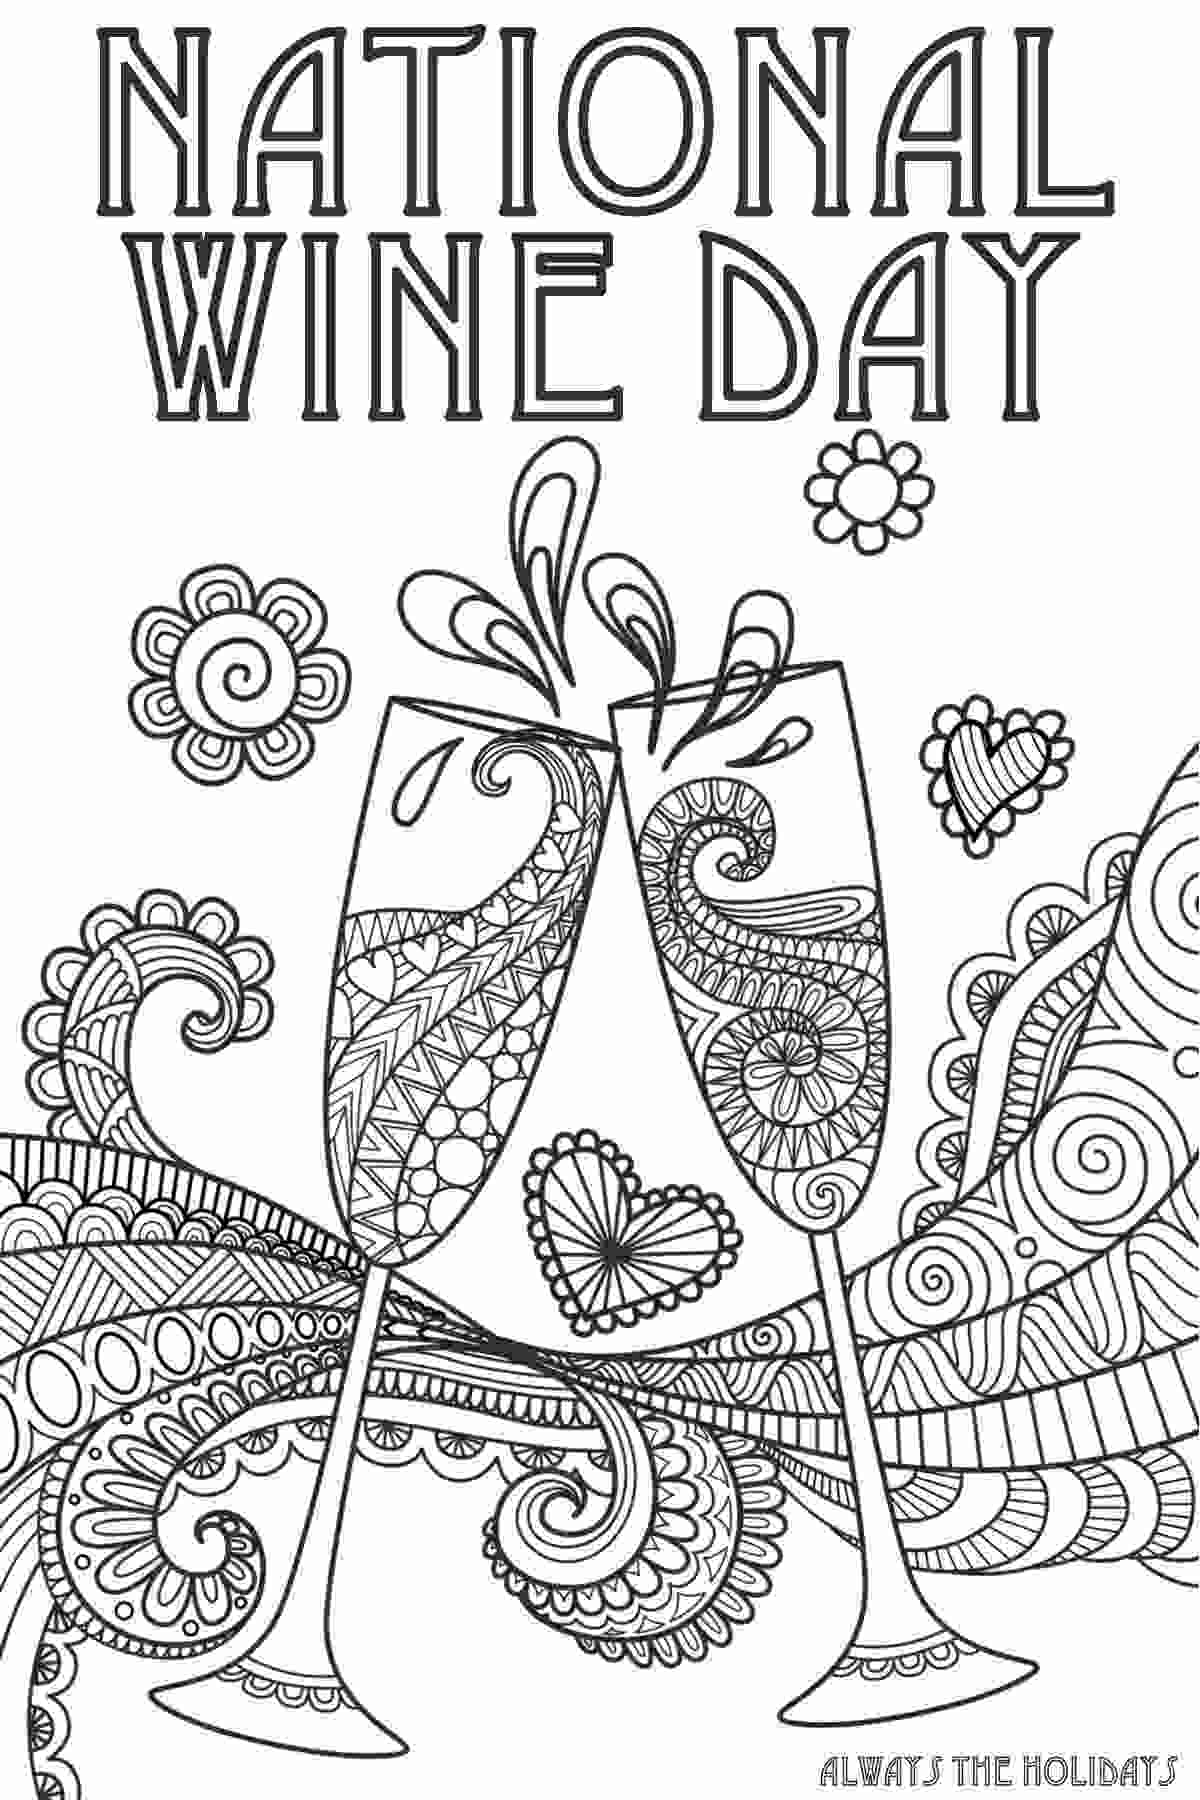 A wine coloring pages that reads "National Wine Day" picturing two champagne flutes clinking with swirls and abstract shapes around them.